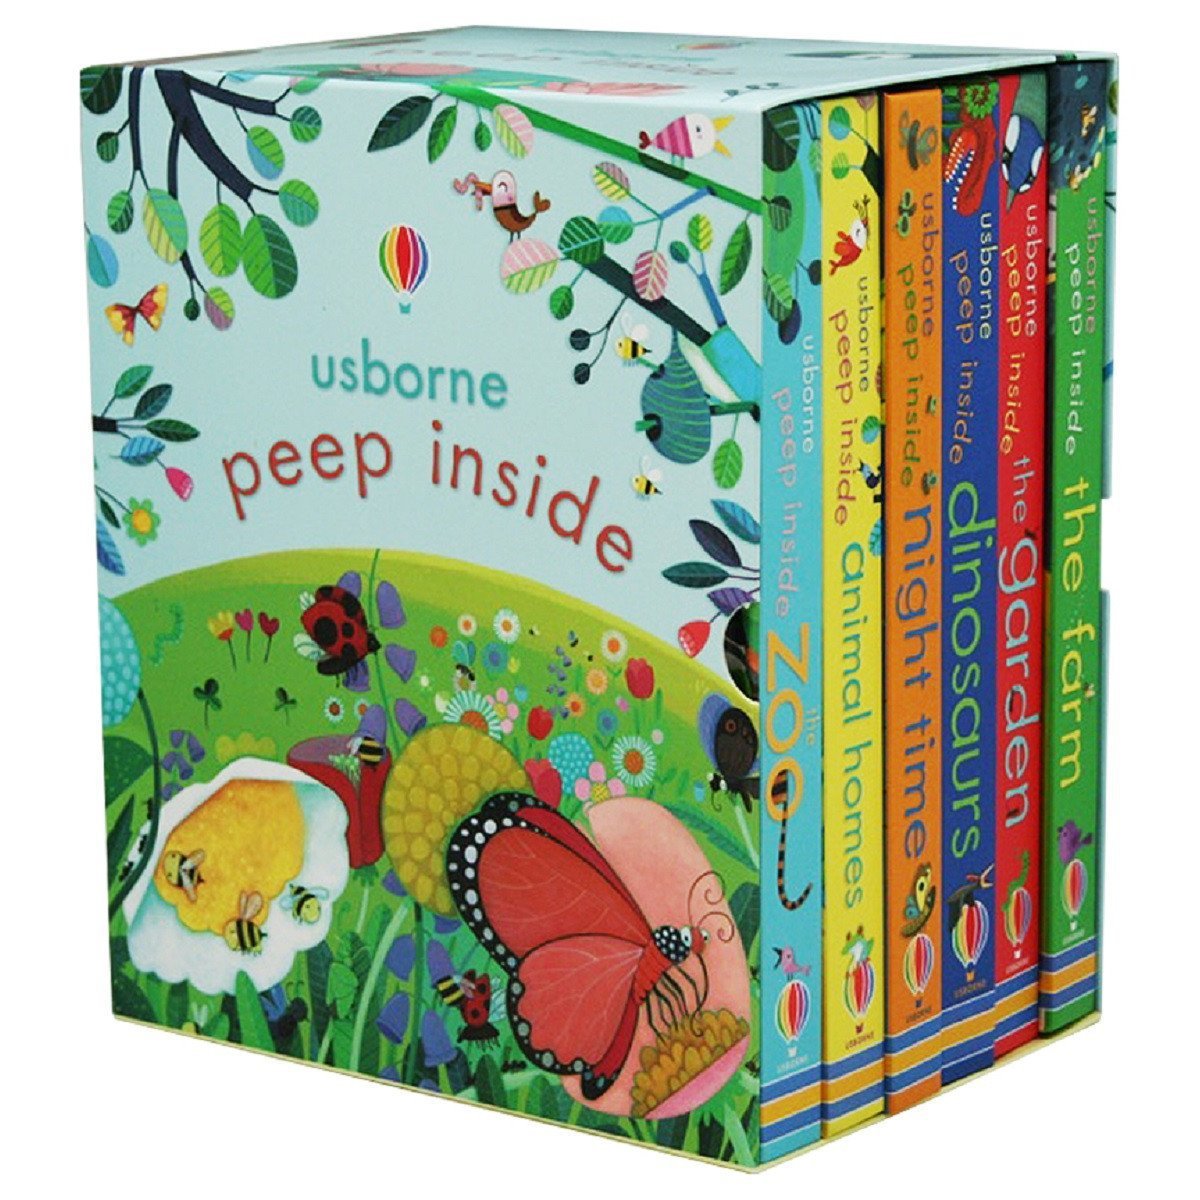 Peep Inside Complete 6 Books Collection By Usborne (Zoo, Animal